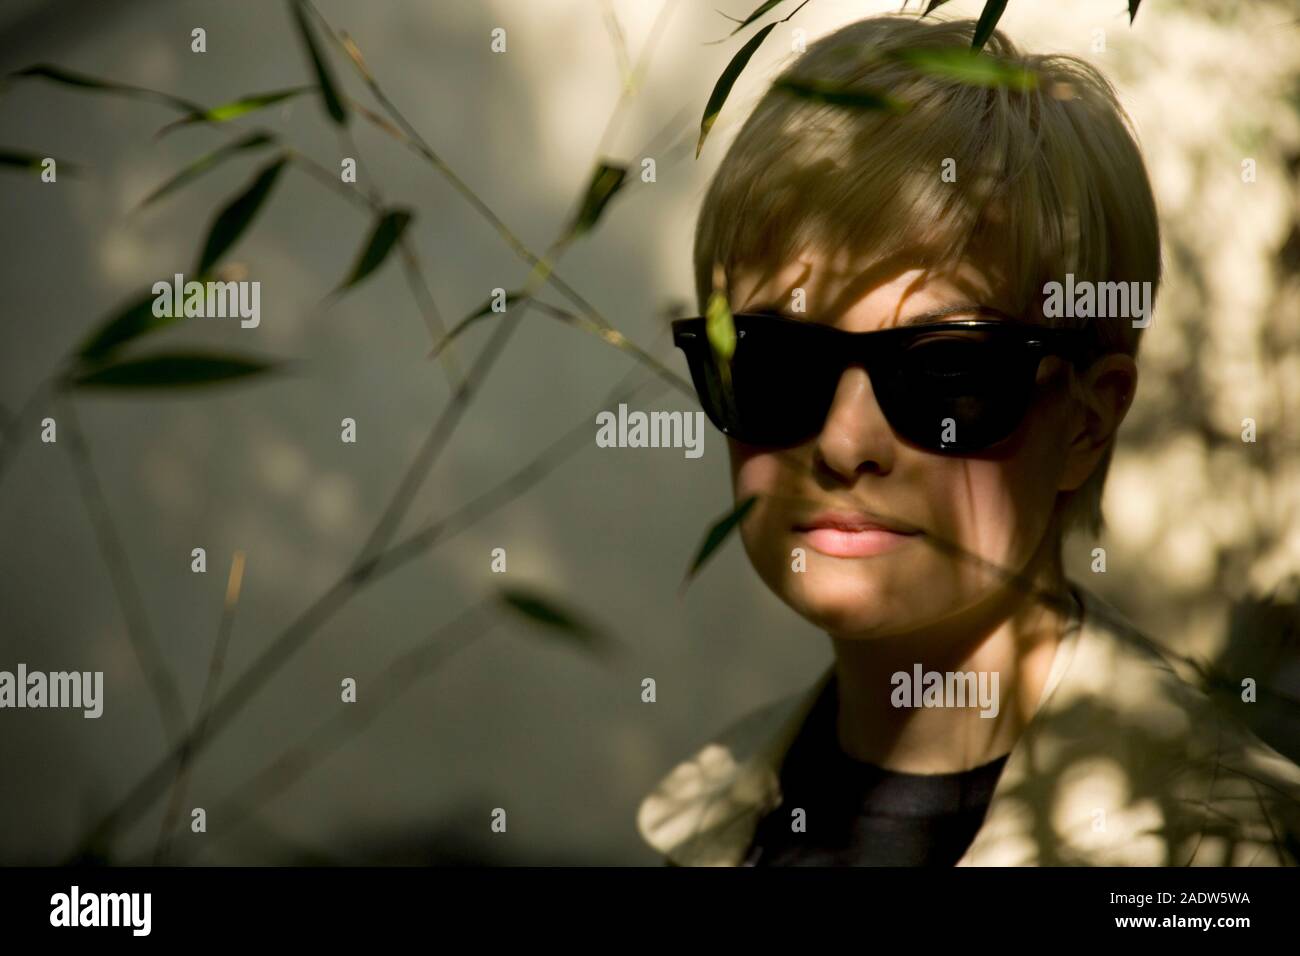 Stylish young woman, 20's, wearing 1950's style trenchcoat and sun glasses, seen through foliage Stock Photo